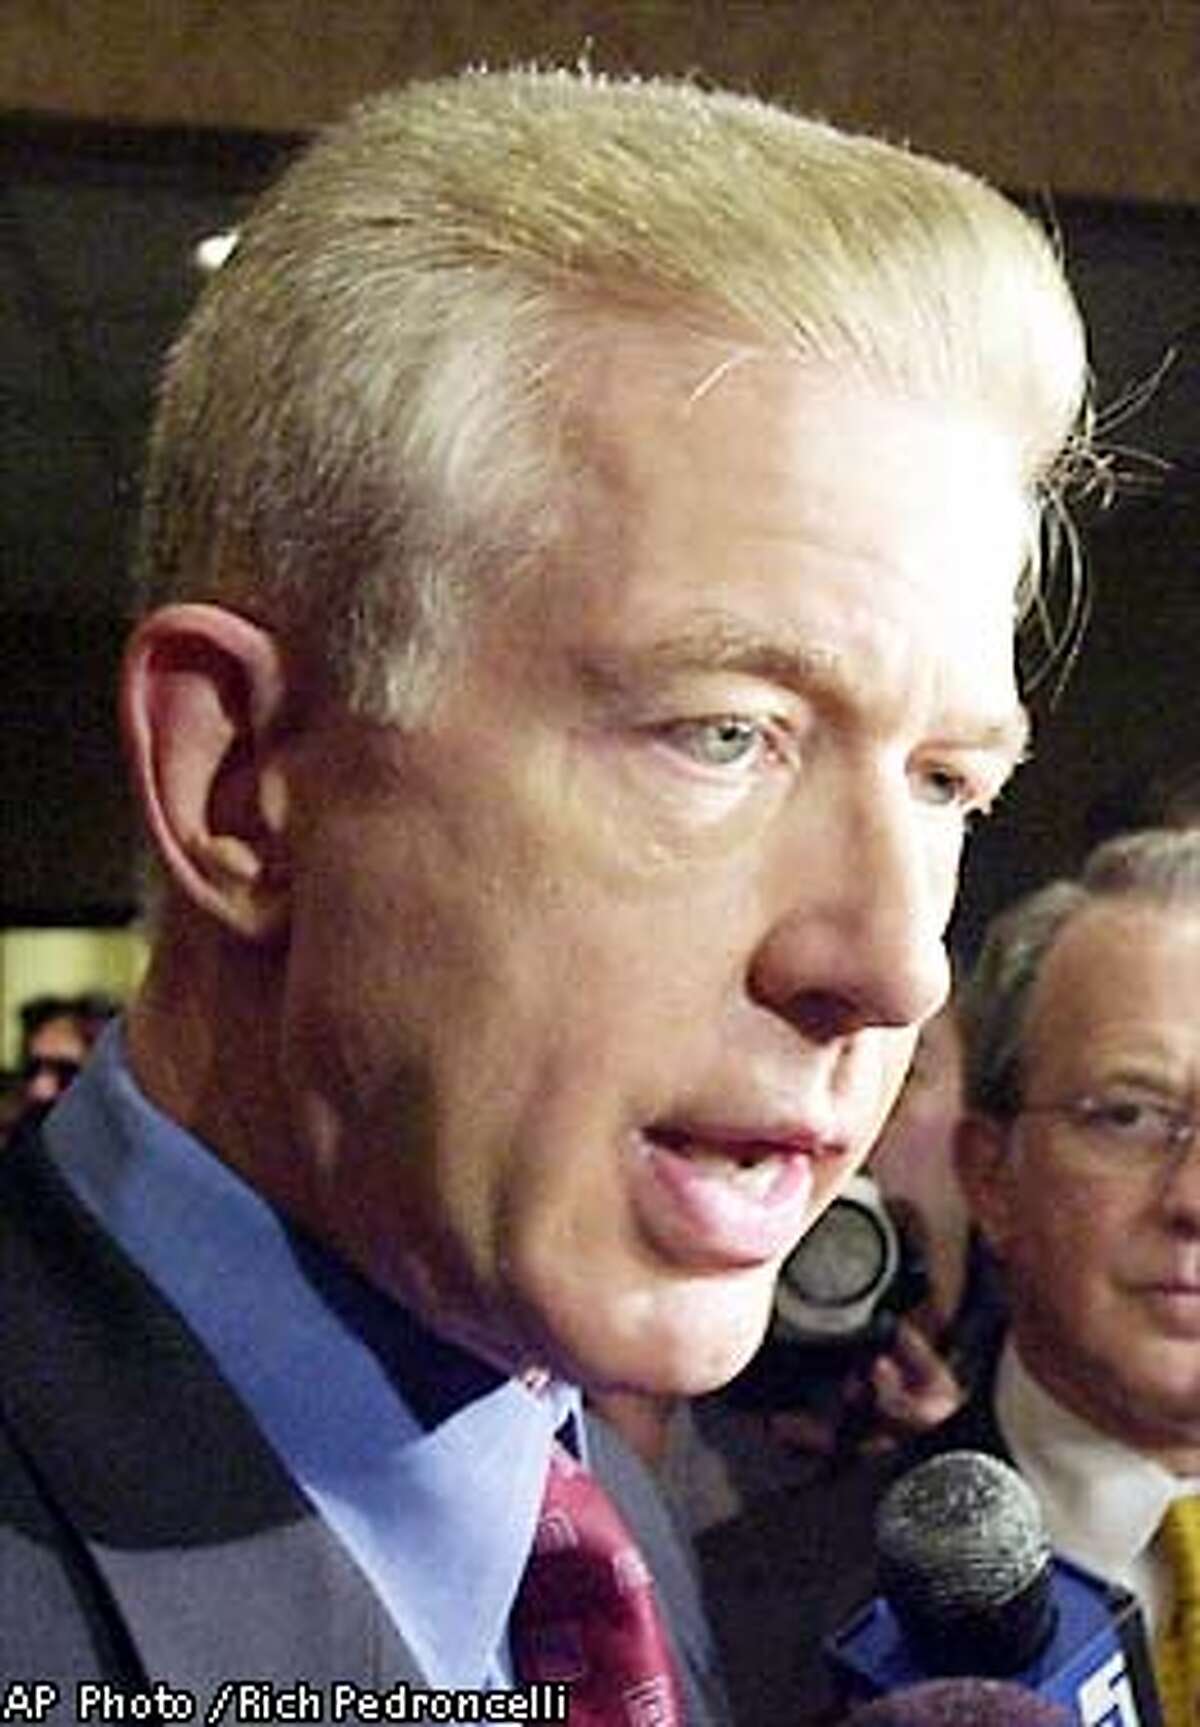 California Gov. Gray Davis told reporters that he wants to get to the bottom of the Oracle contract probe as much as anybody, following his appearance before the American Federation of State, County and Municipal Employees association, in Sacramento,Calif., Monday, May 6, 2002. A state legislative committee is to begin hearings on the Oracle software contract and several Davis administration members have been called to testify.(AP Photo/Rich Pedroncelli)